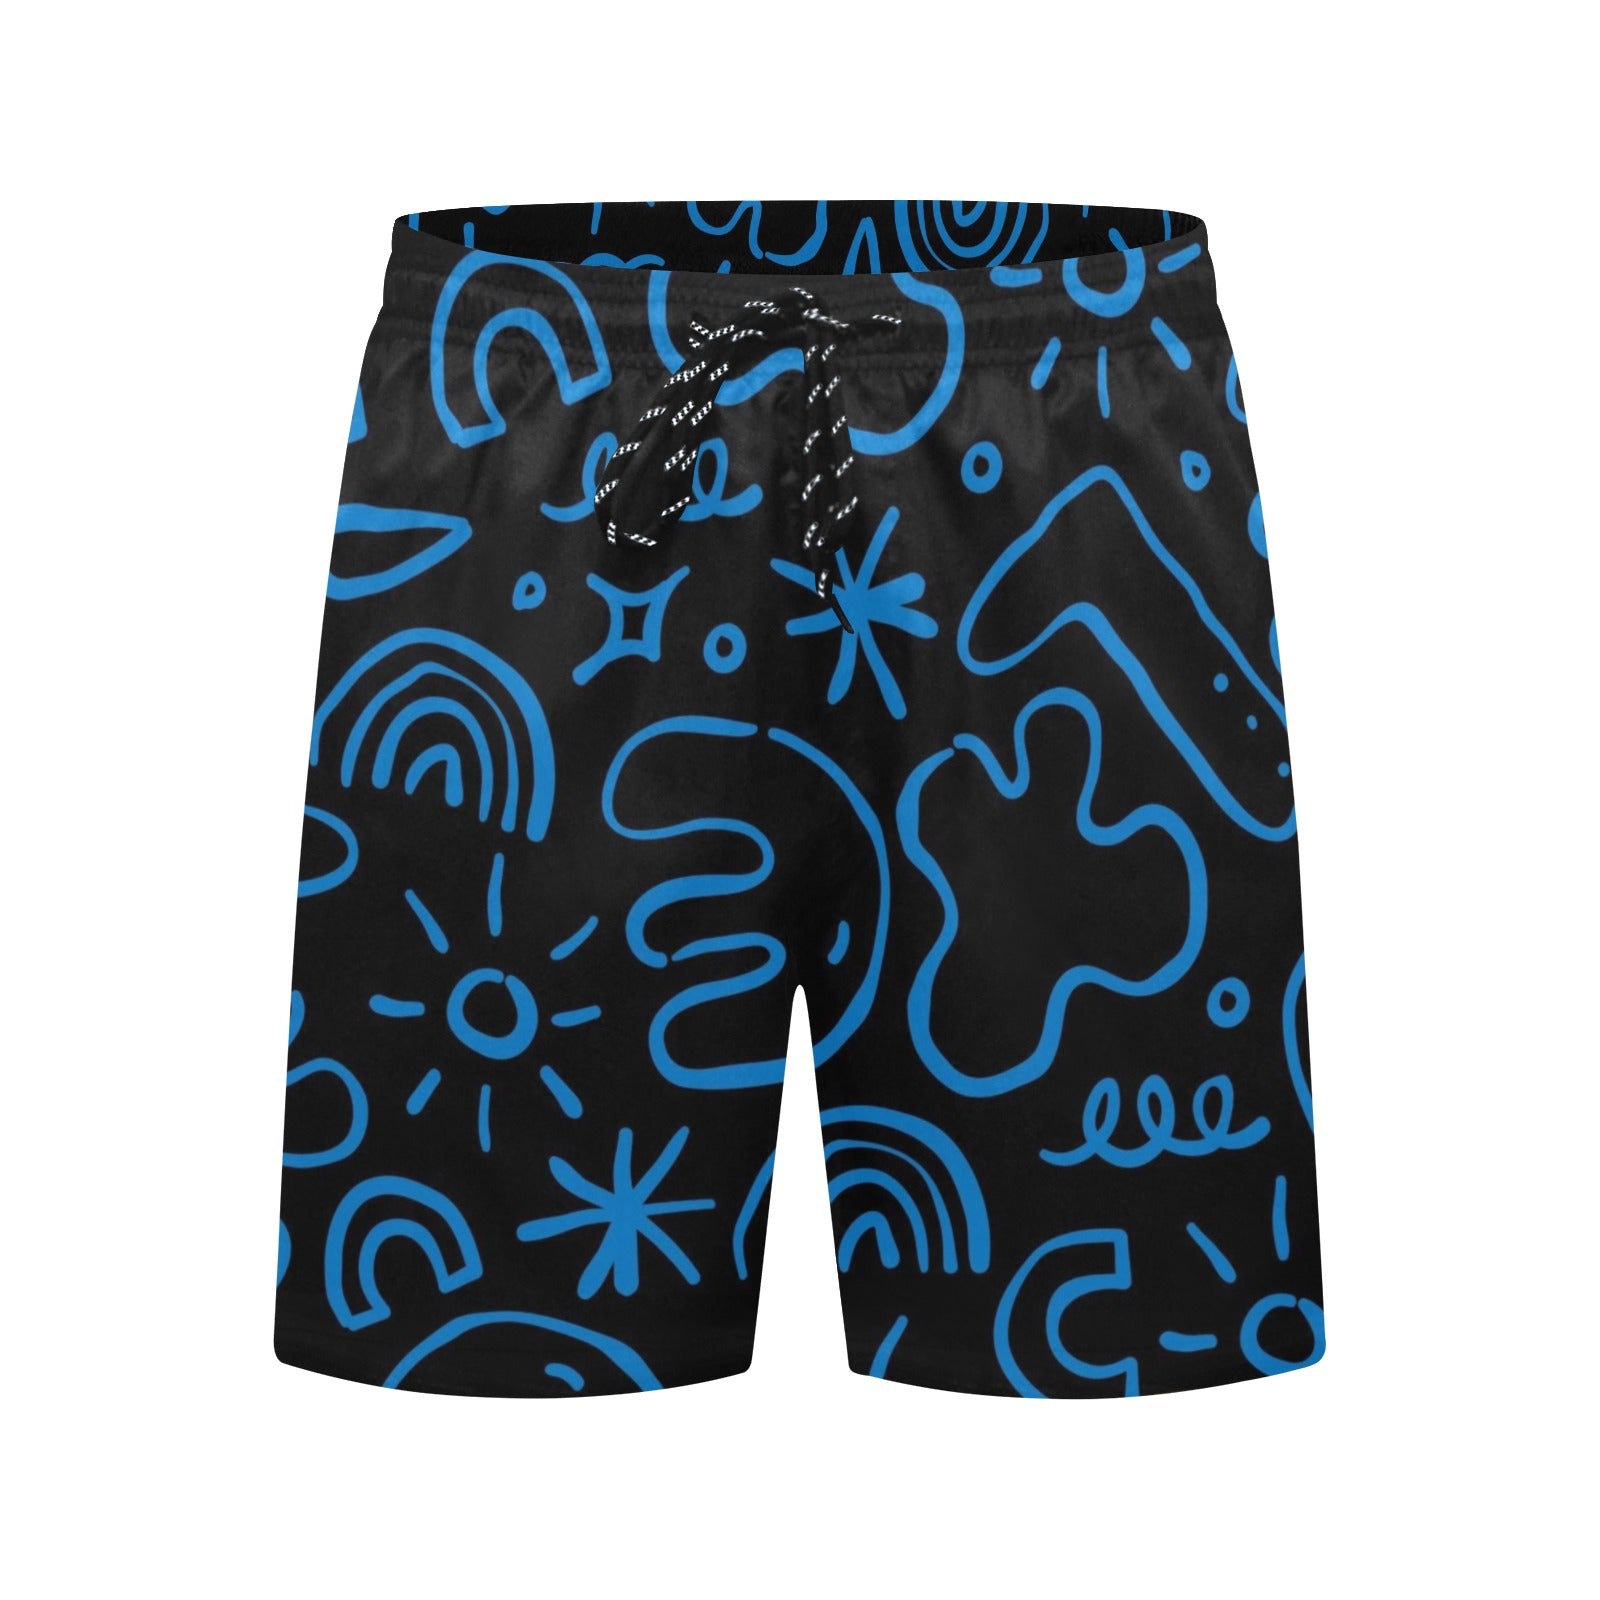 Blue Squiggle - Men's Mid-Length Beach Shorts Men's Mid-Length Beach Shorts Funny